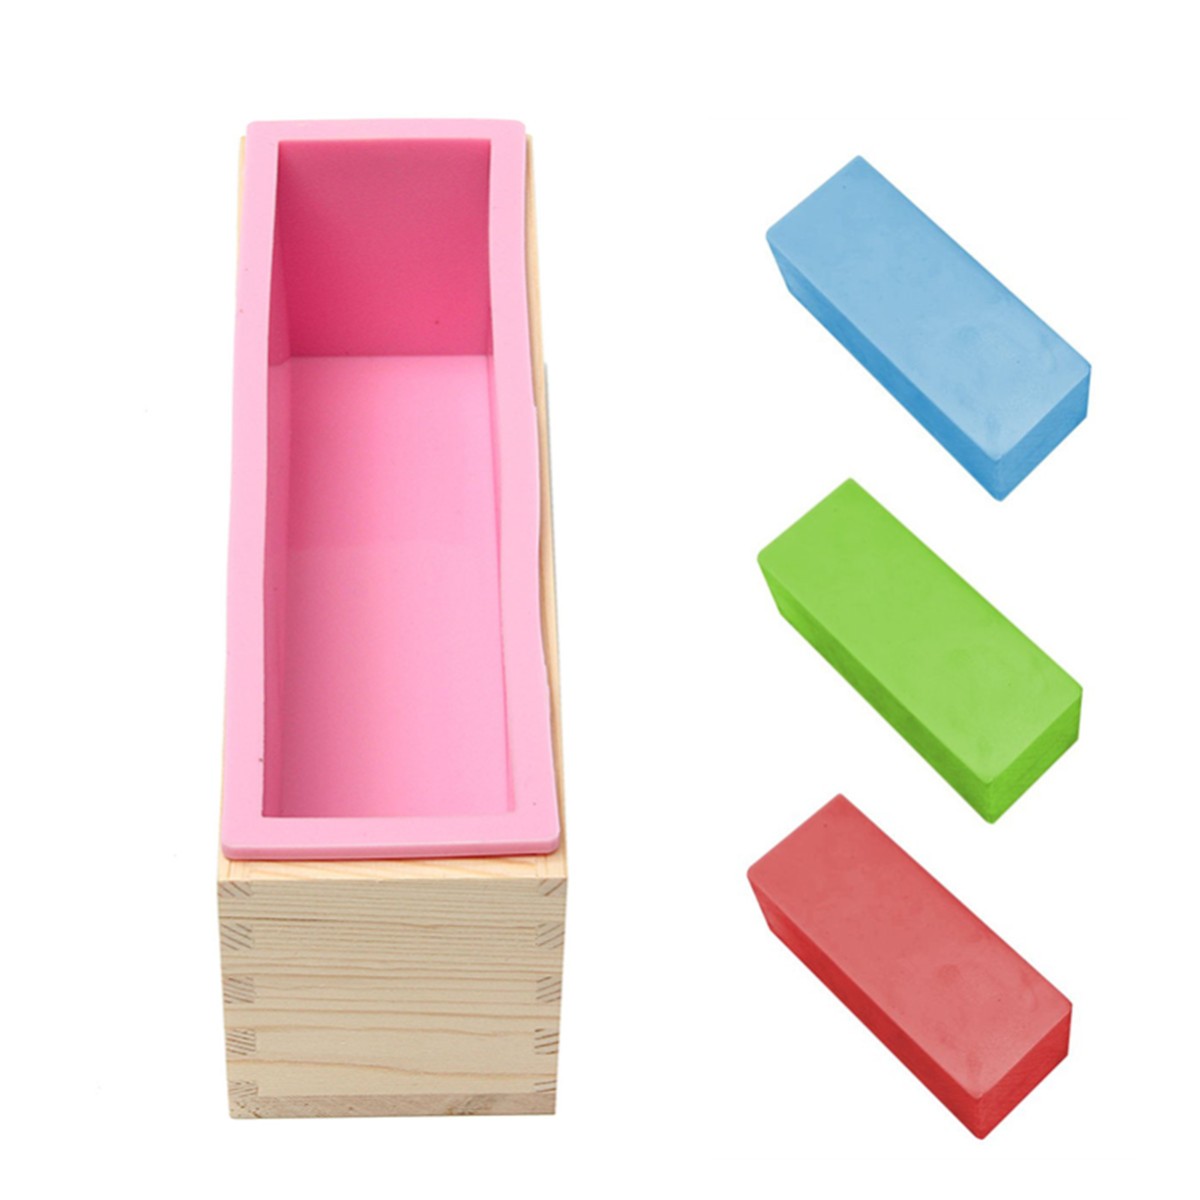 Silicone-Loaf-Bread-Cake-Mold-Soap-Making-Mould-Biscuit-Baking-Tool-with-Wooden-Box-1400541